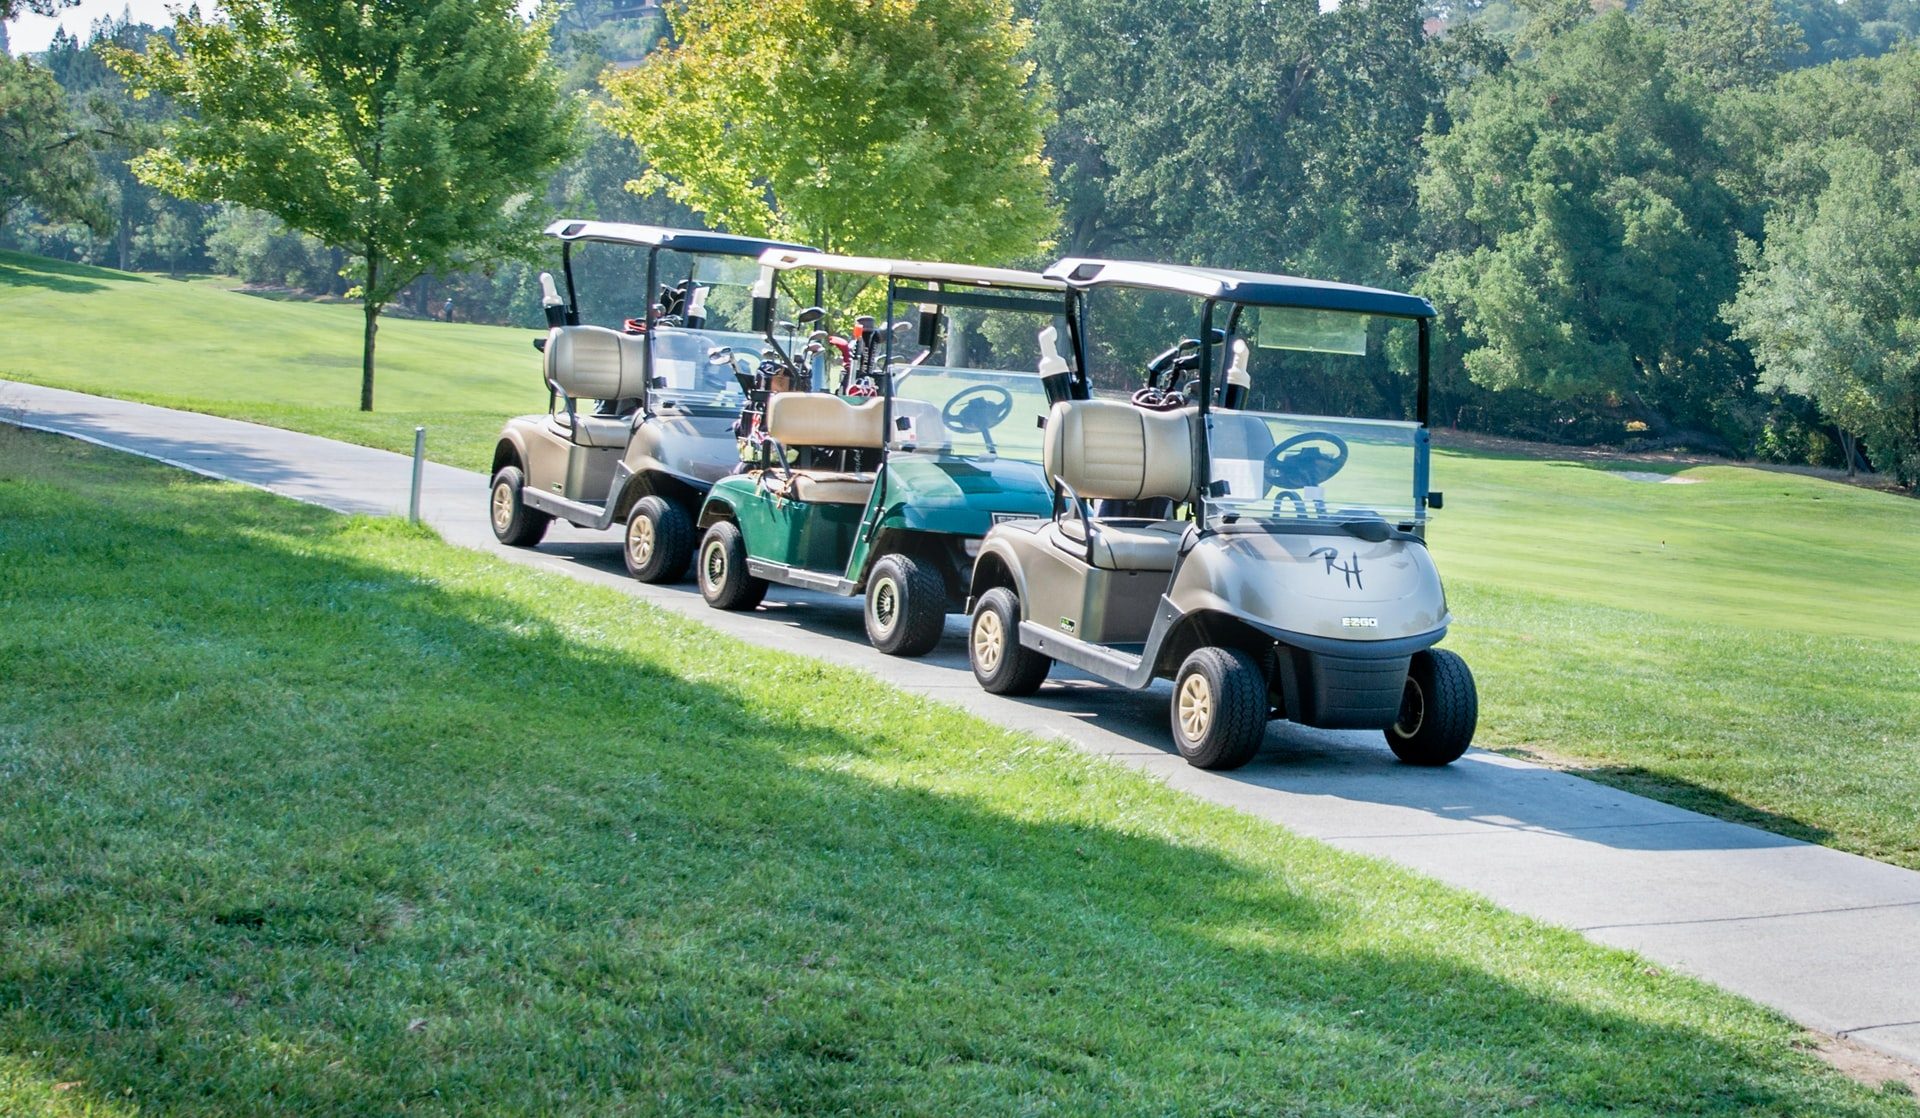 How to Make Golf Cart Ride Smoother